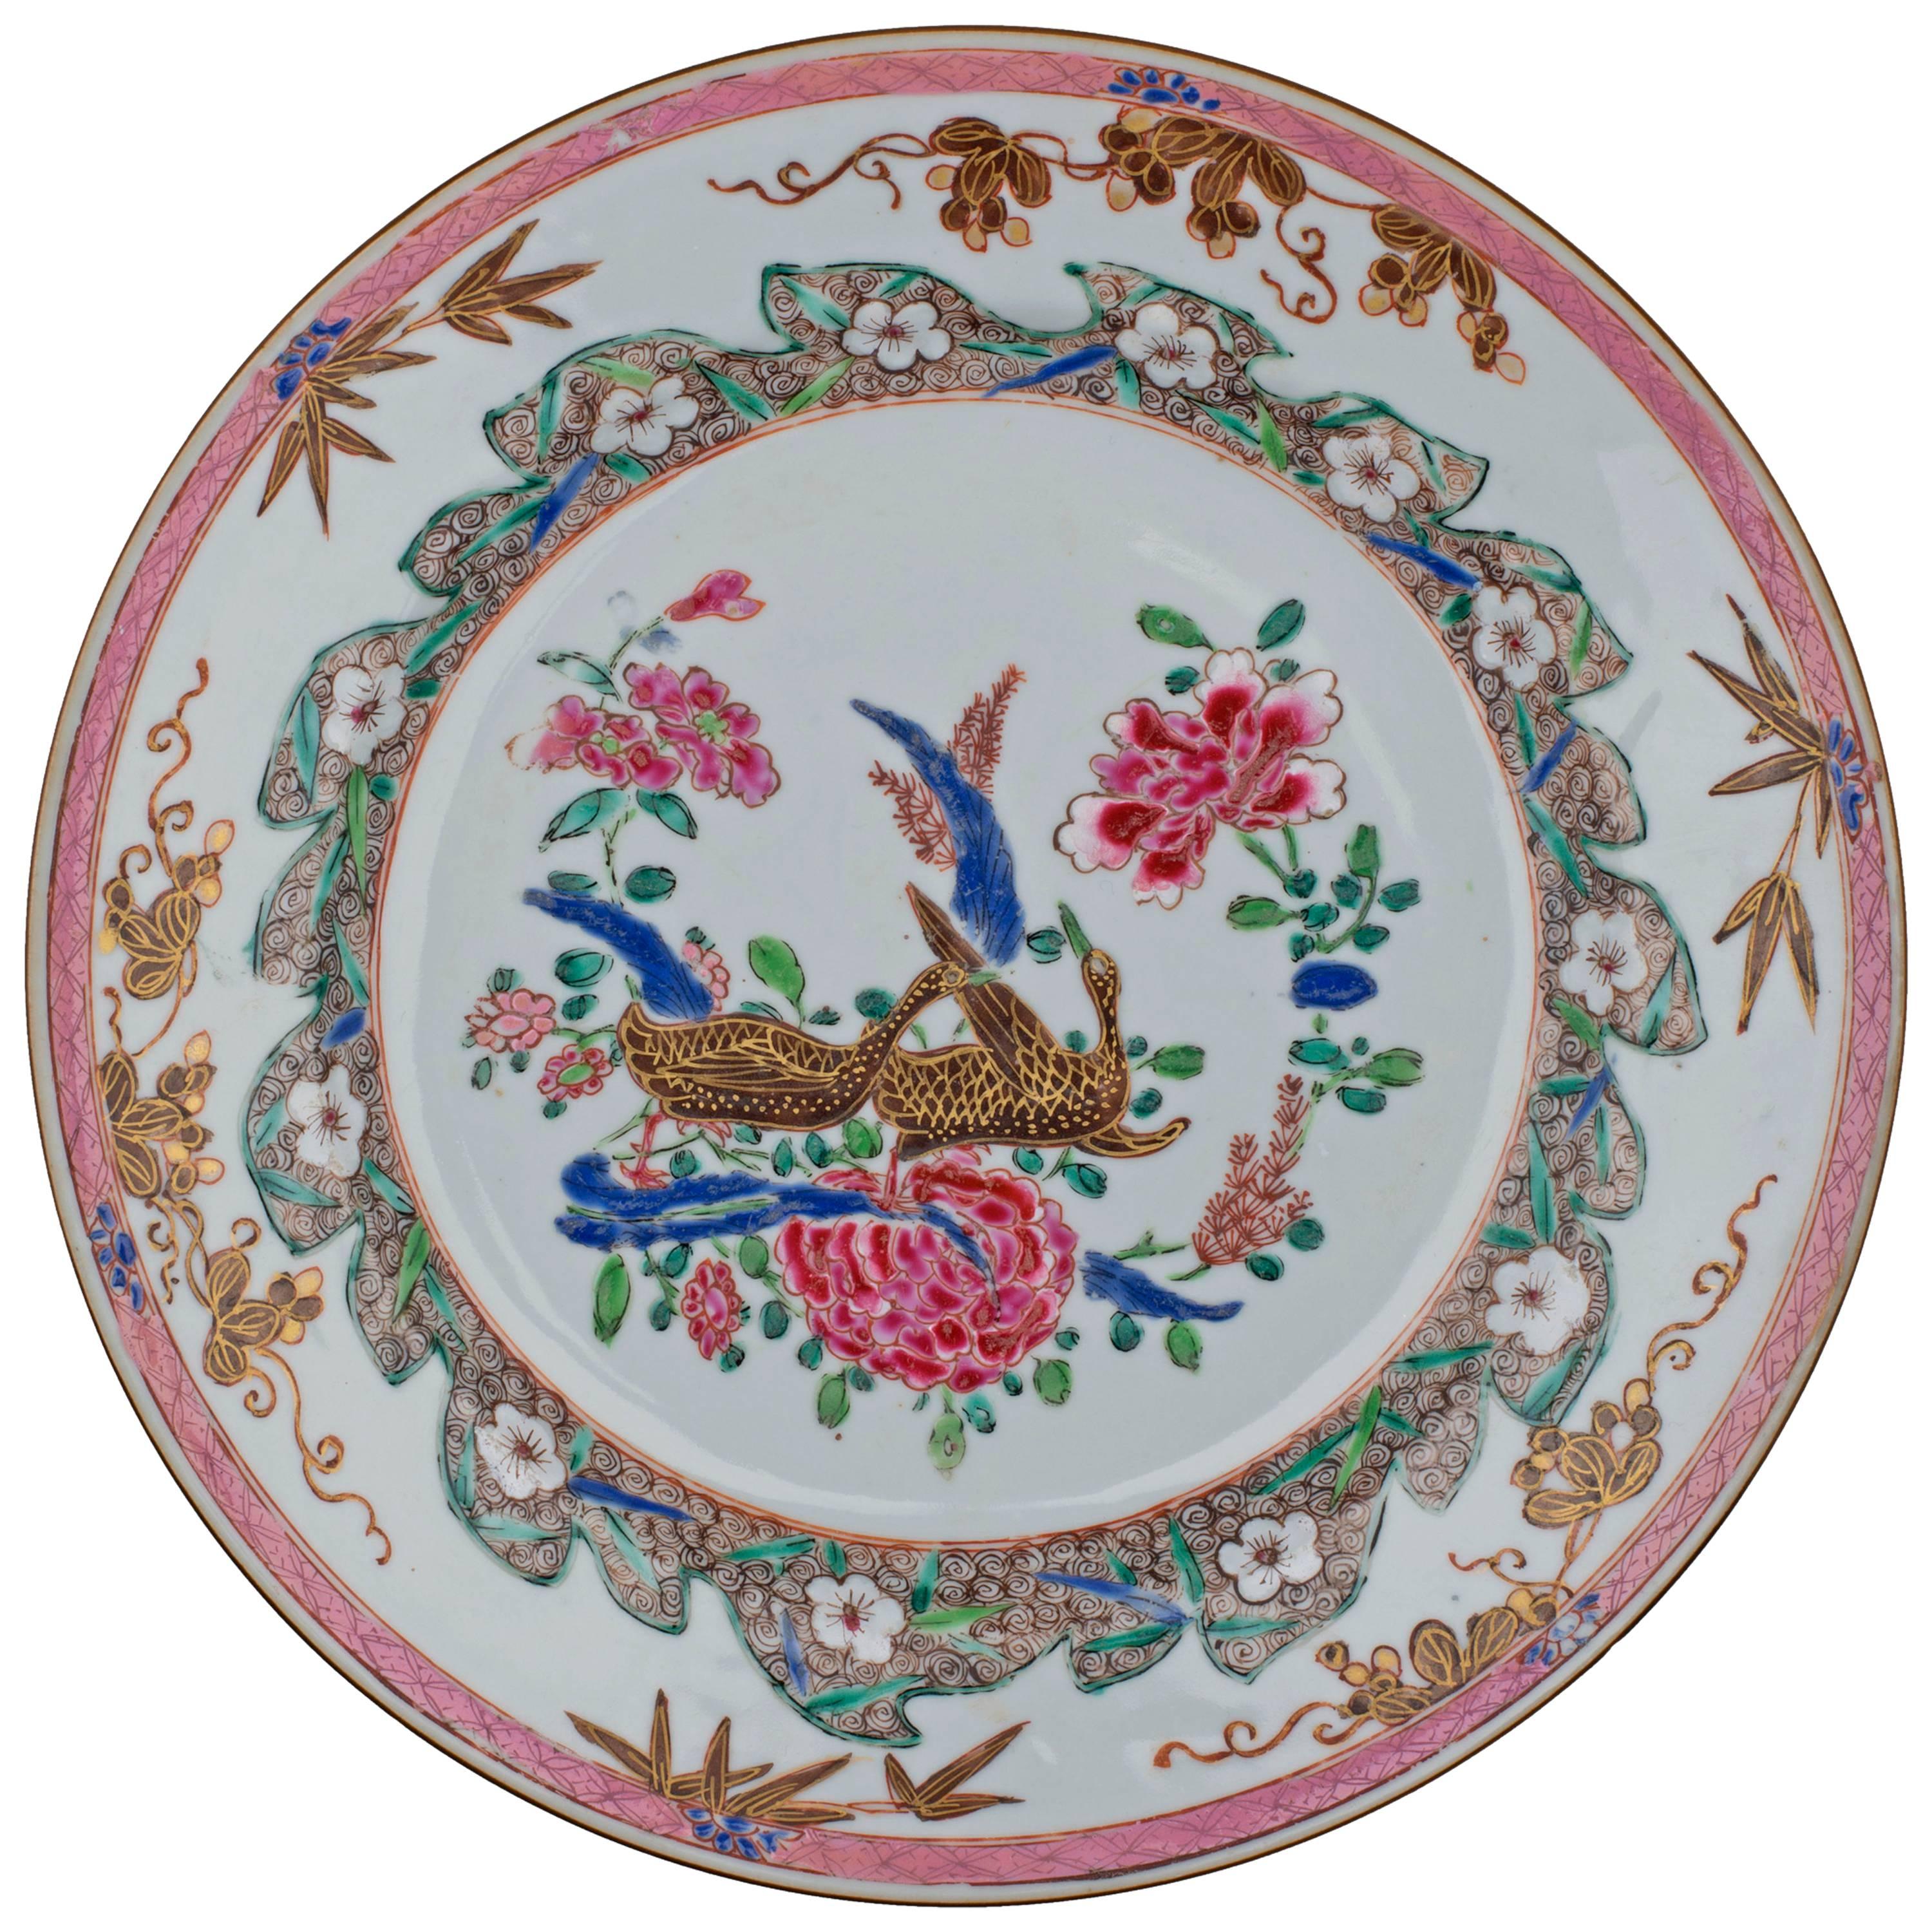 Chinese Export Porcelain Famille Rose Plate Painted Pair of Ducks, 18th Century